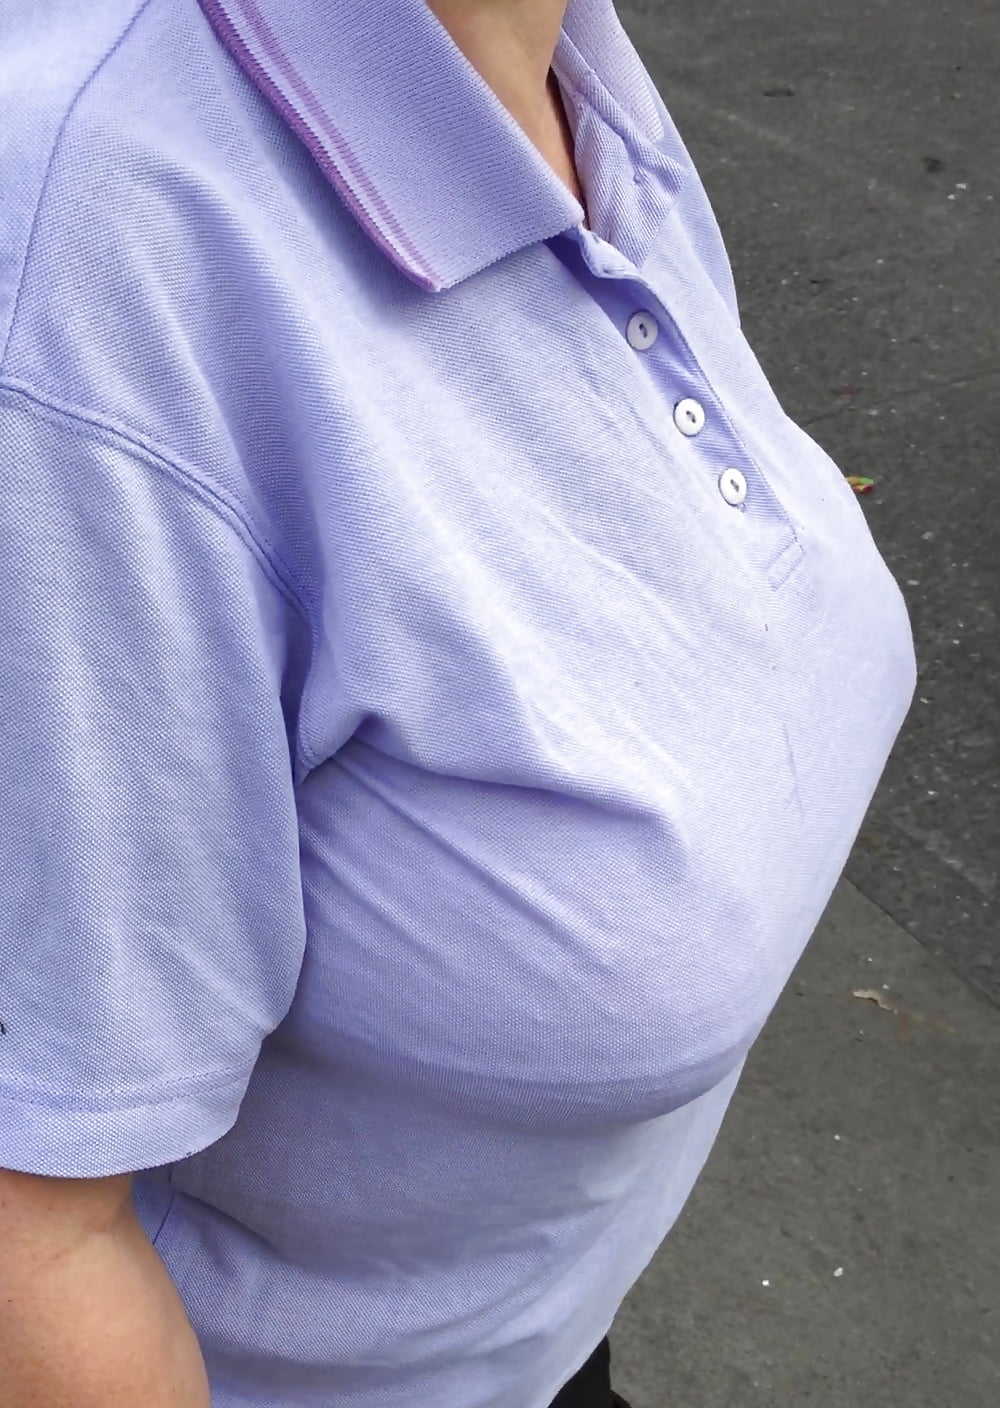 Big Titted Granny Candids In Purple Polo Shirt